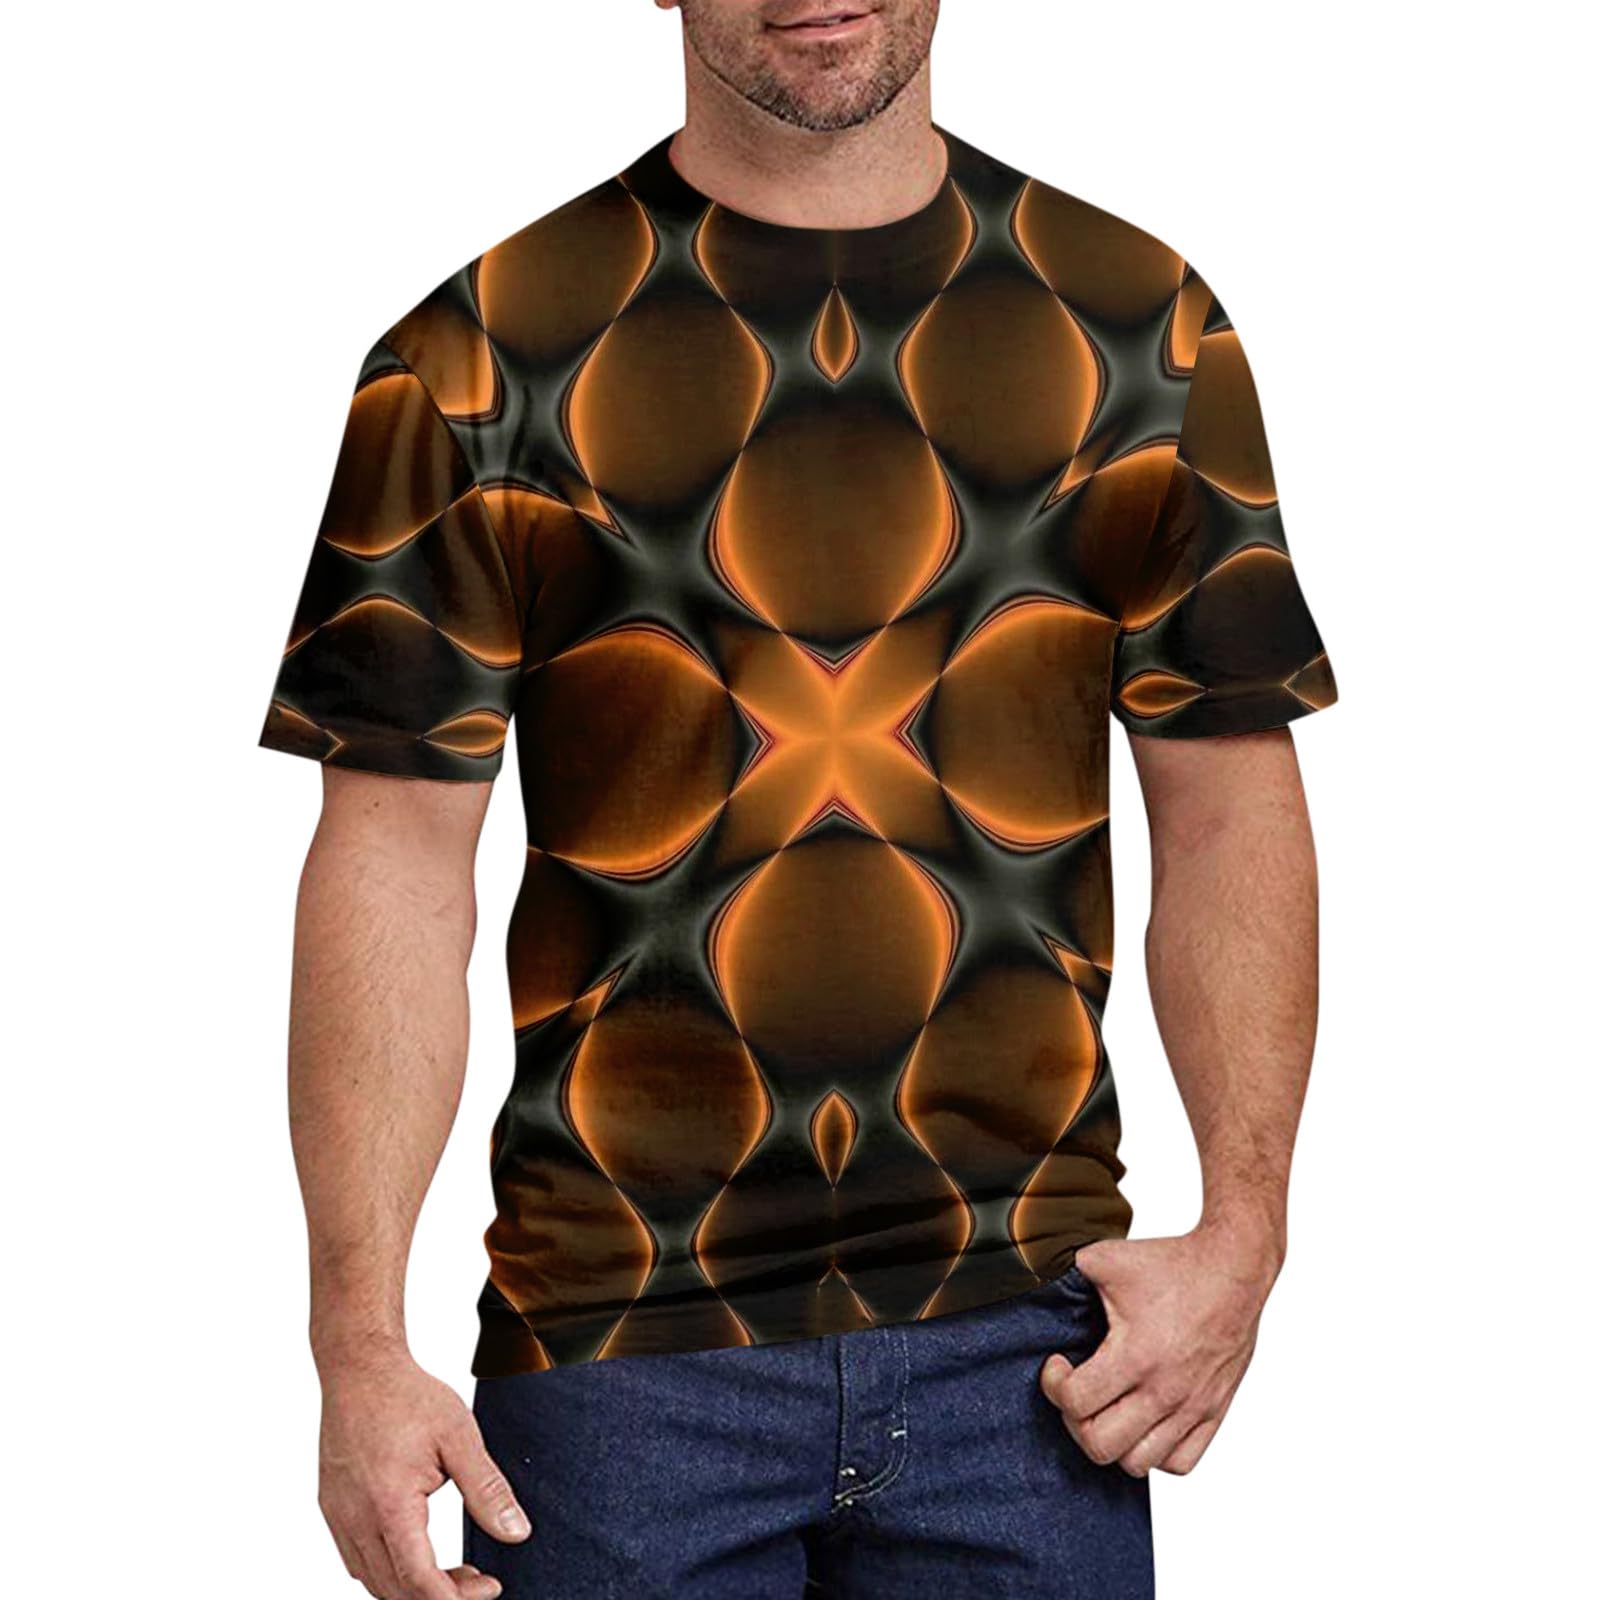 Buy 3D Printing Graphic T Shirts for Men Novelty Crew Neck Short